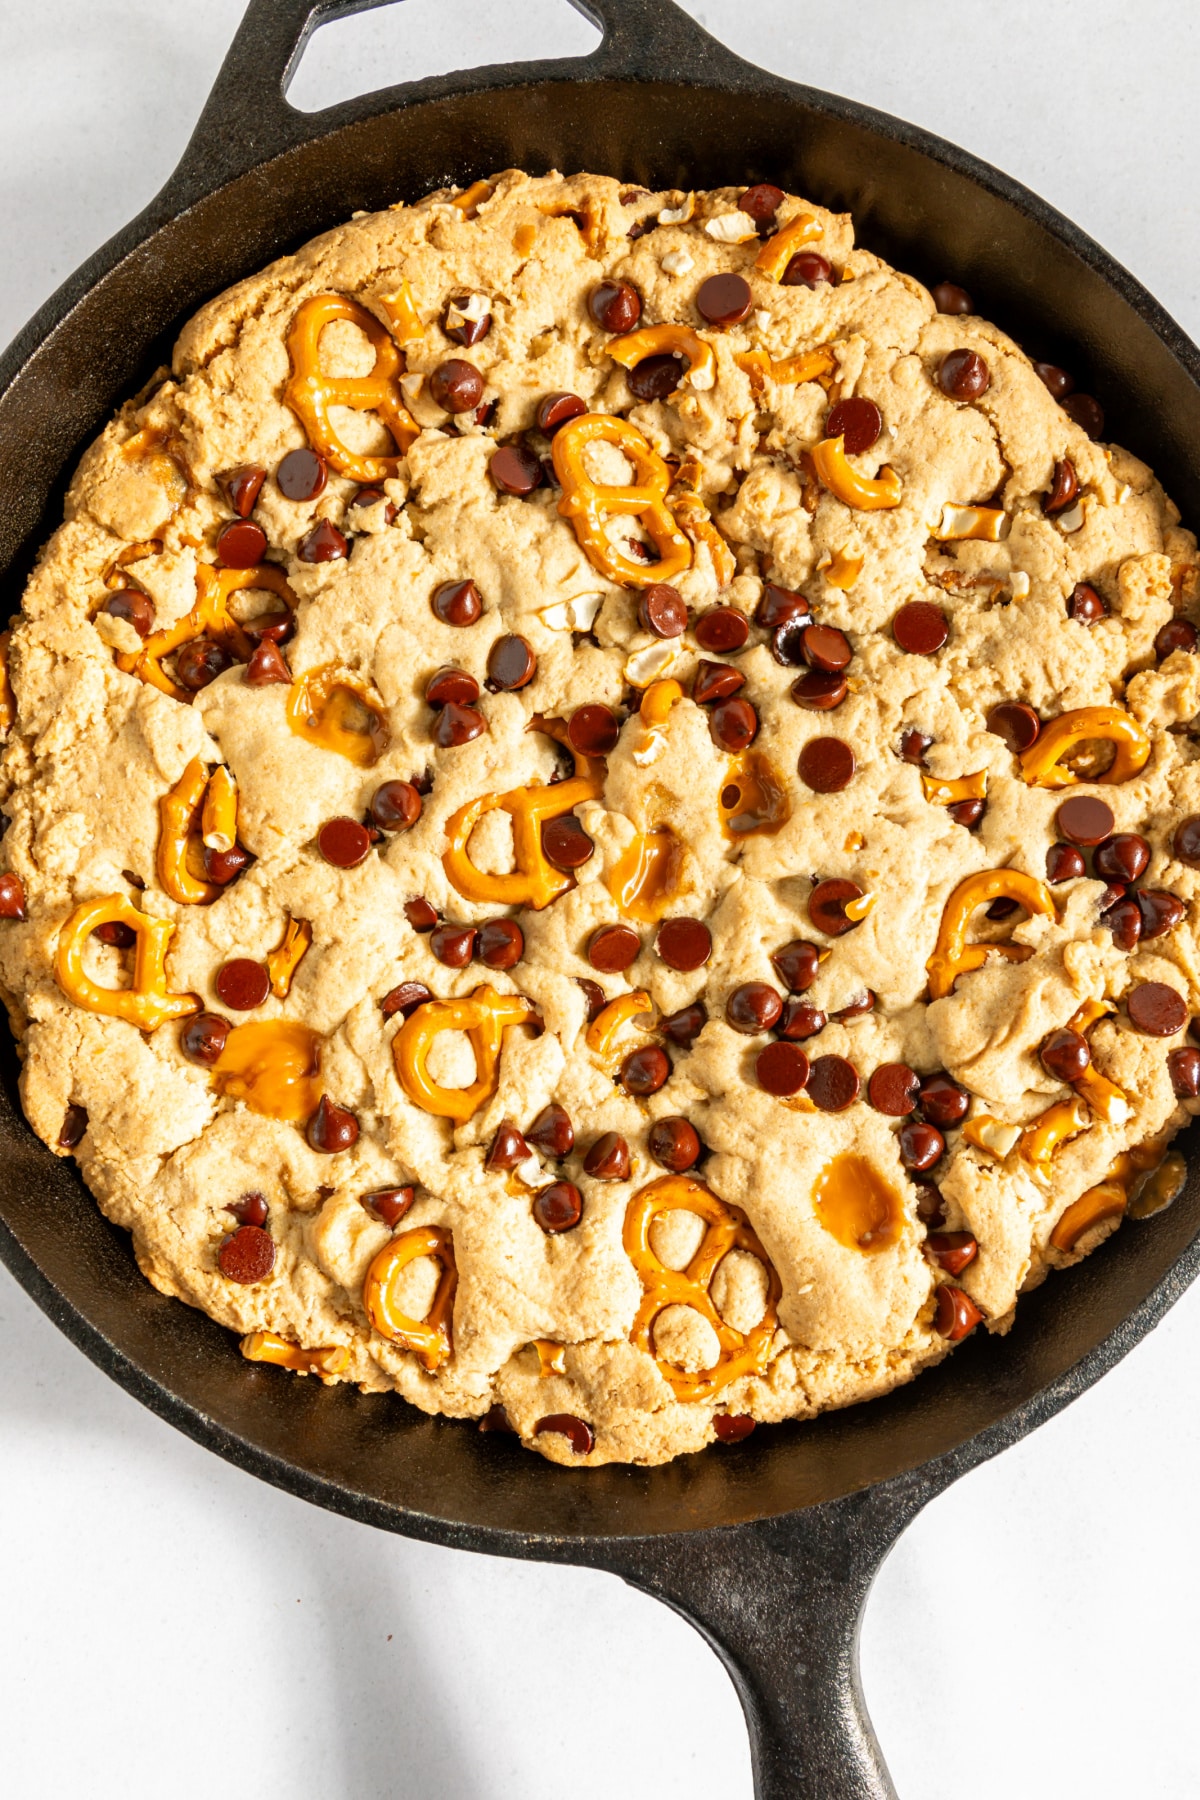 Overhead view of a baked skillet cookie with caramel, pretzels, and chocolate chips.